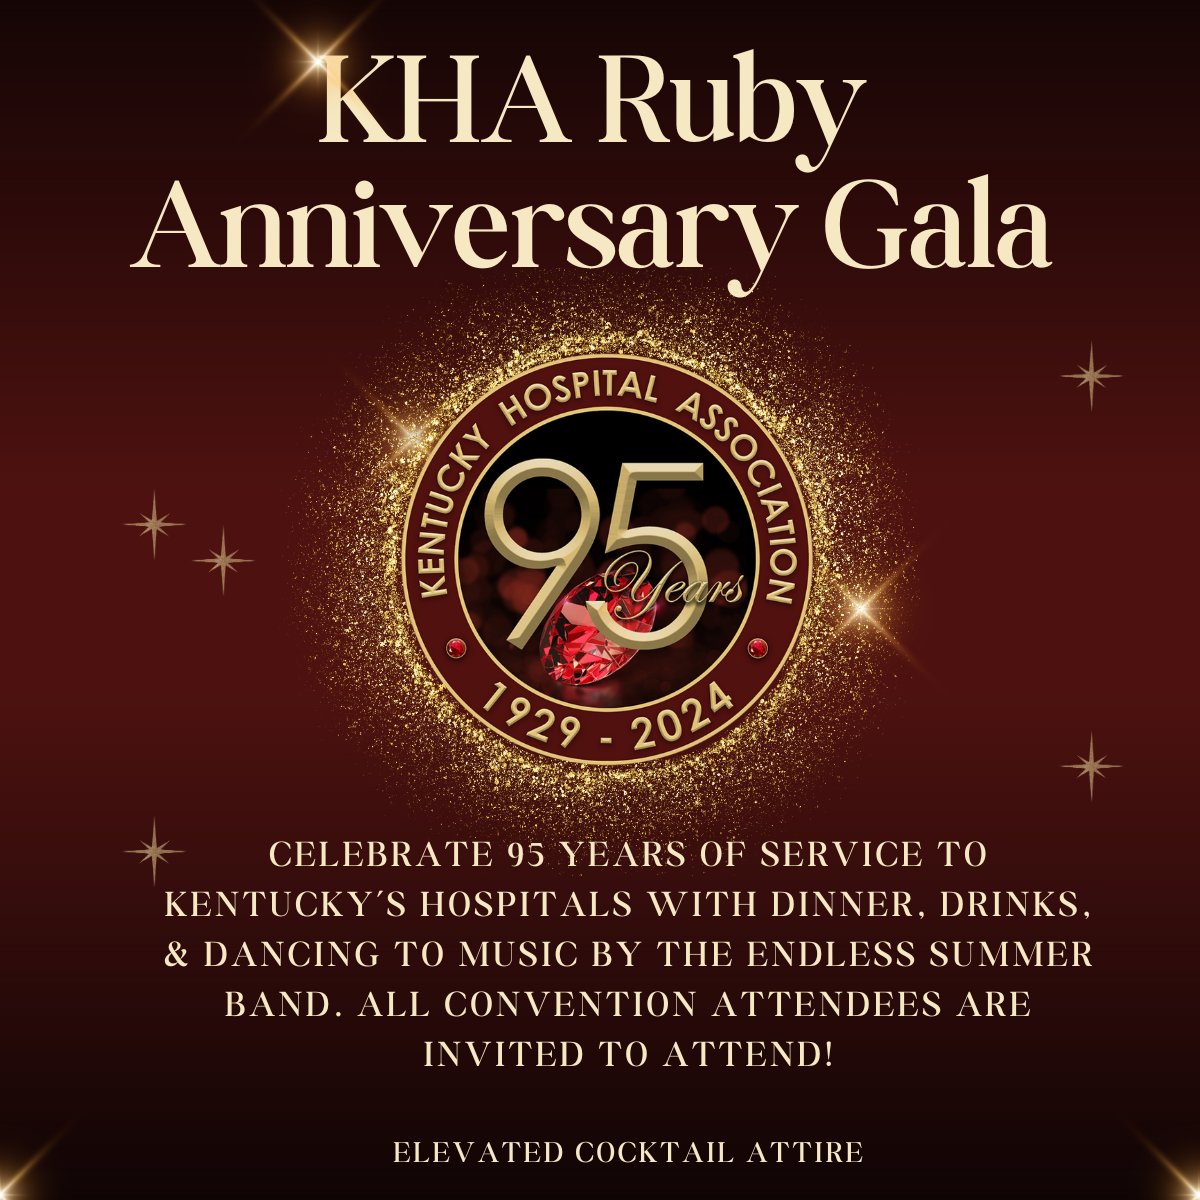 KHA 95th Annual Convention attendees are invited to celebrate our 95 years of service to Kentucky's hospitals at the Ruby Anniversary Gala on May 21 in Lexington! Enjoy dinner, drinks, & dancing at this can't miss event! kyha.com/education-hub/…